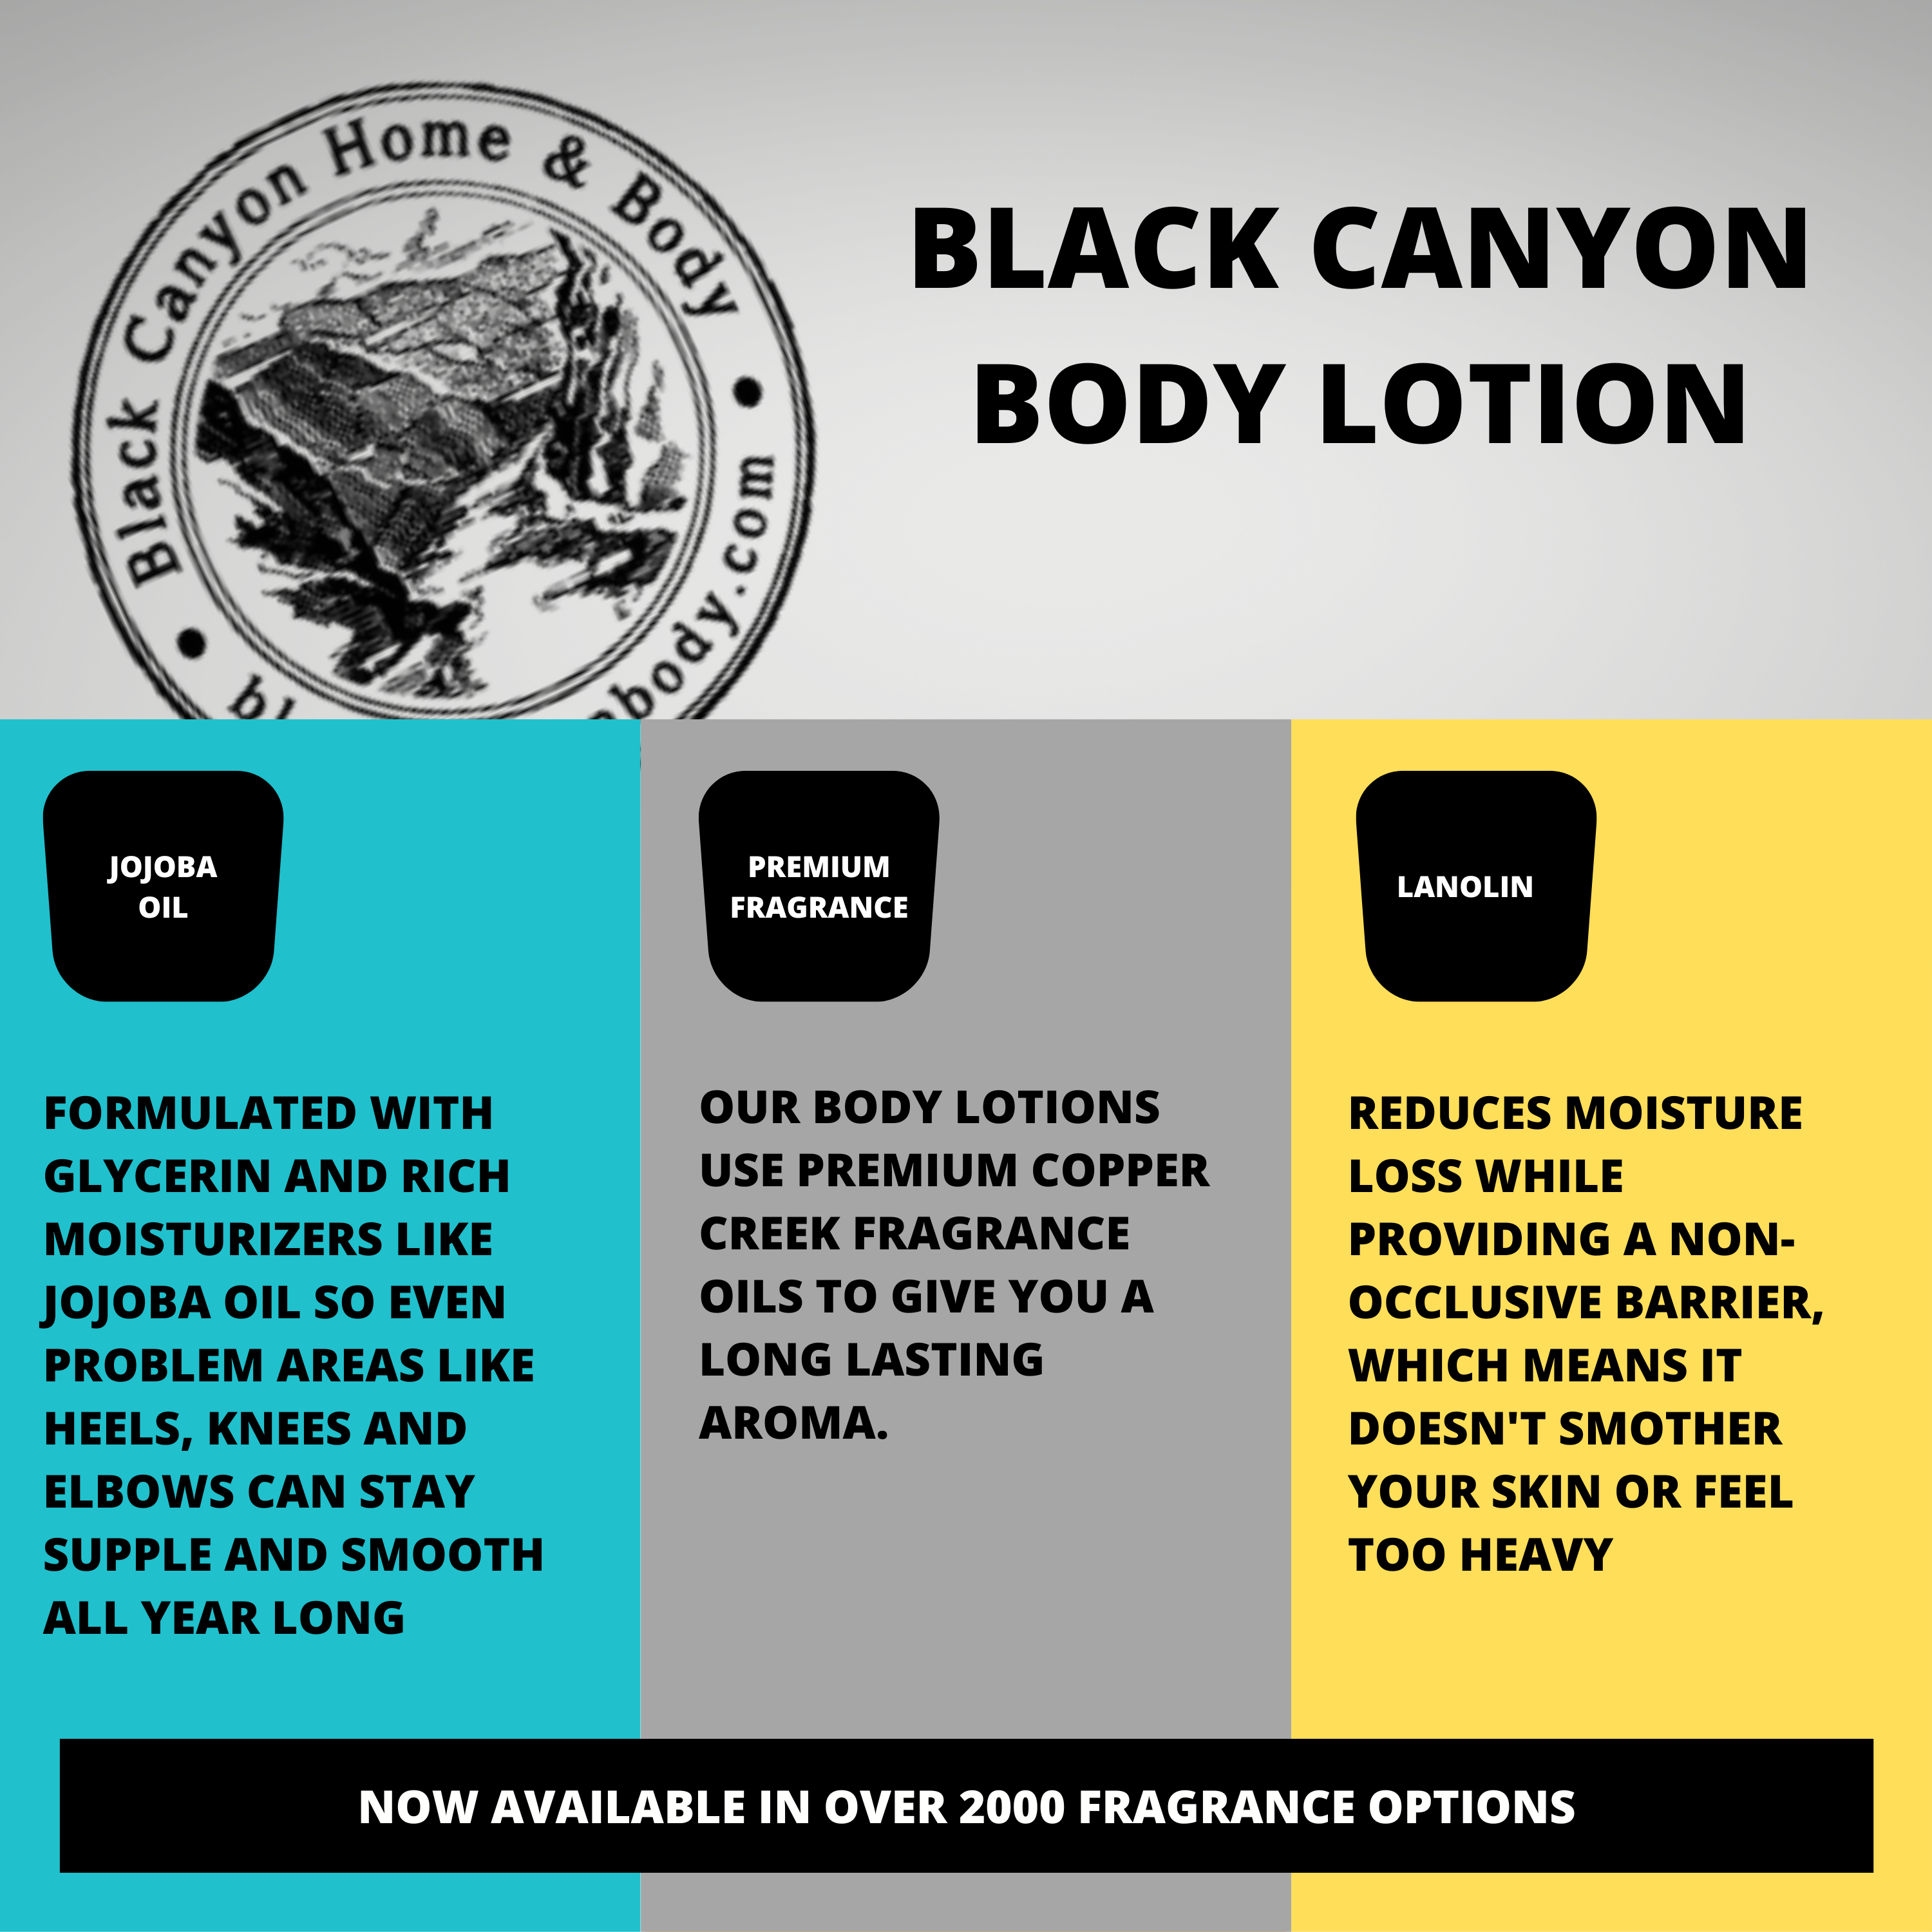 Black Canyon Berry Champagne Scented Luxury Body Lotion with Lanolin and Jojoba Oil